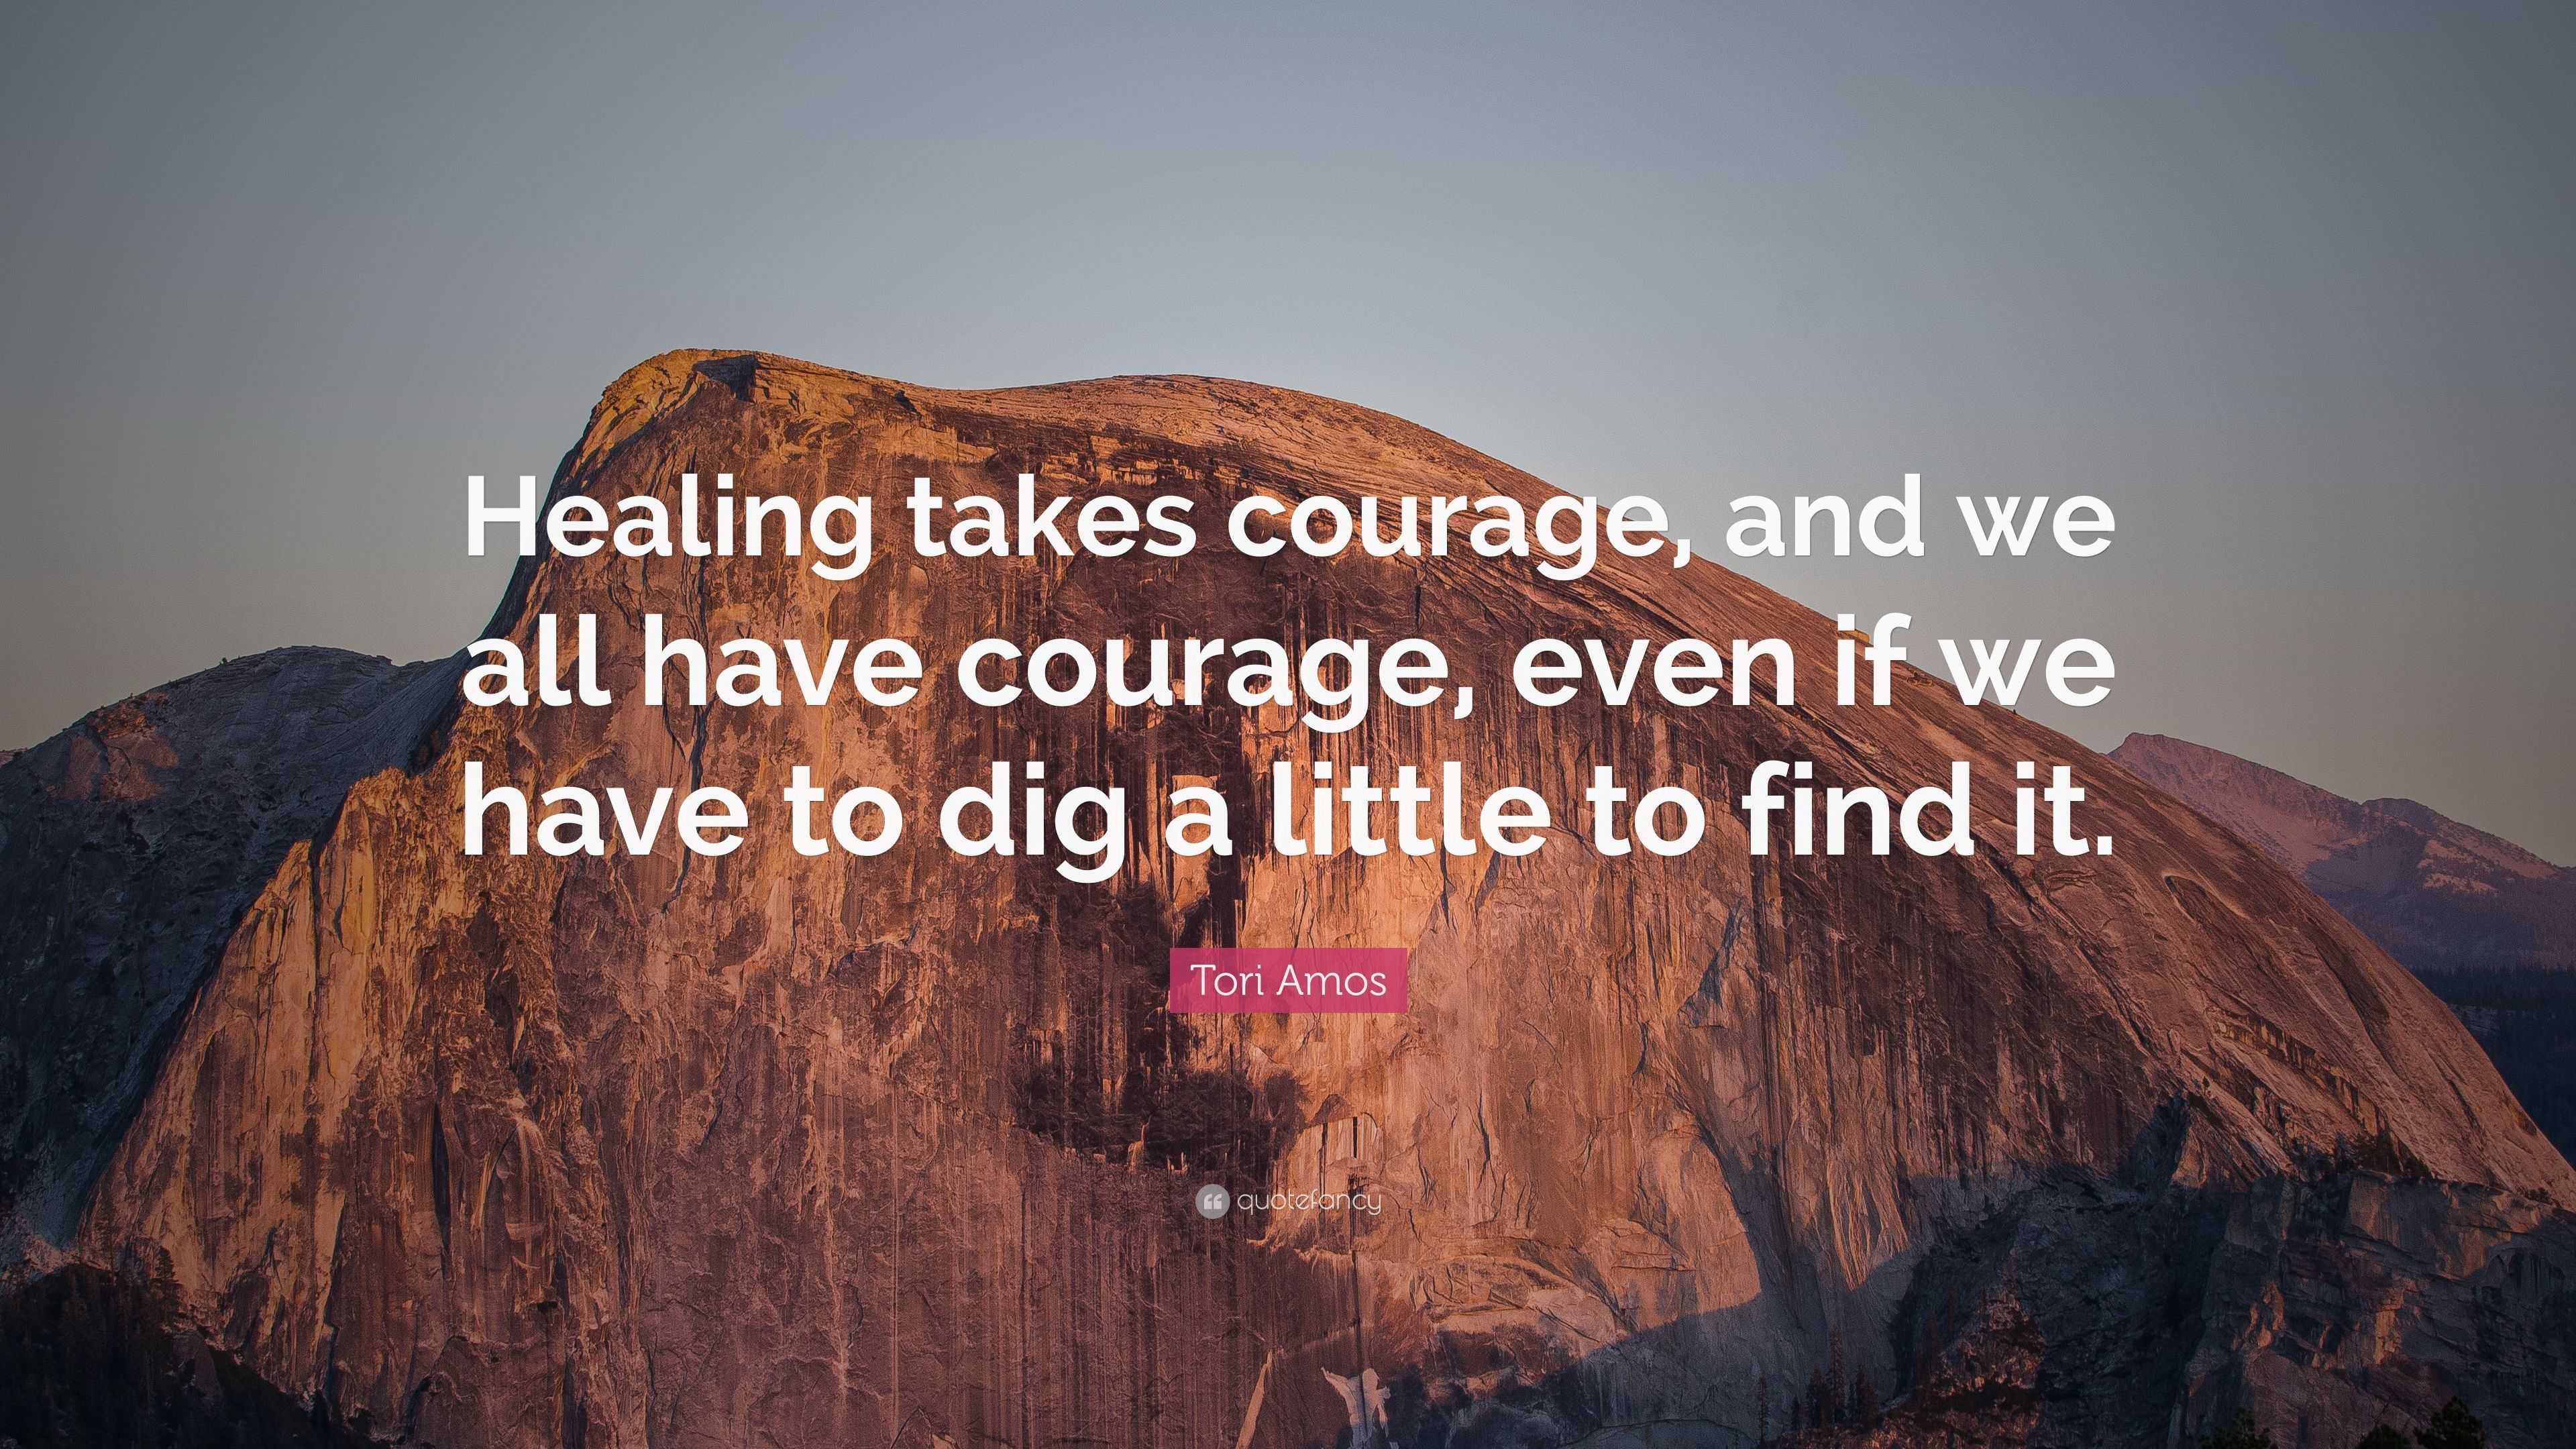 Tori Amos Quote: “Healing takes courage, and we all have courage, even ...